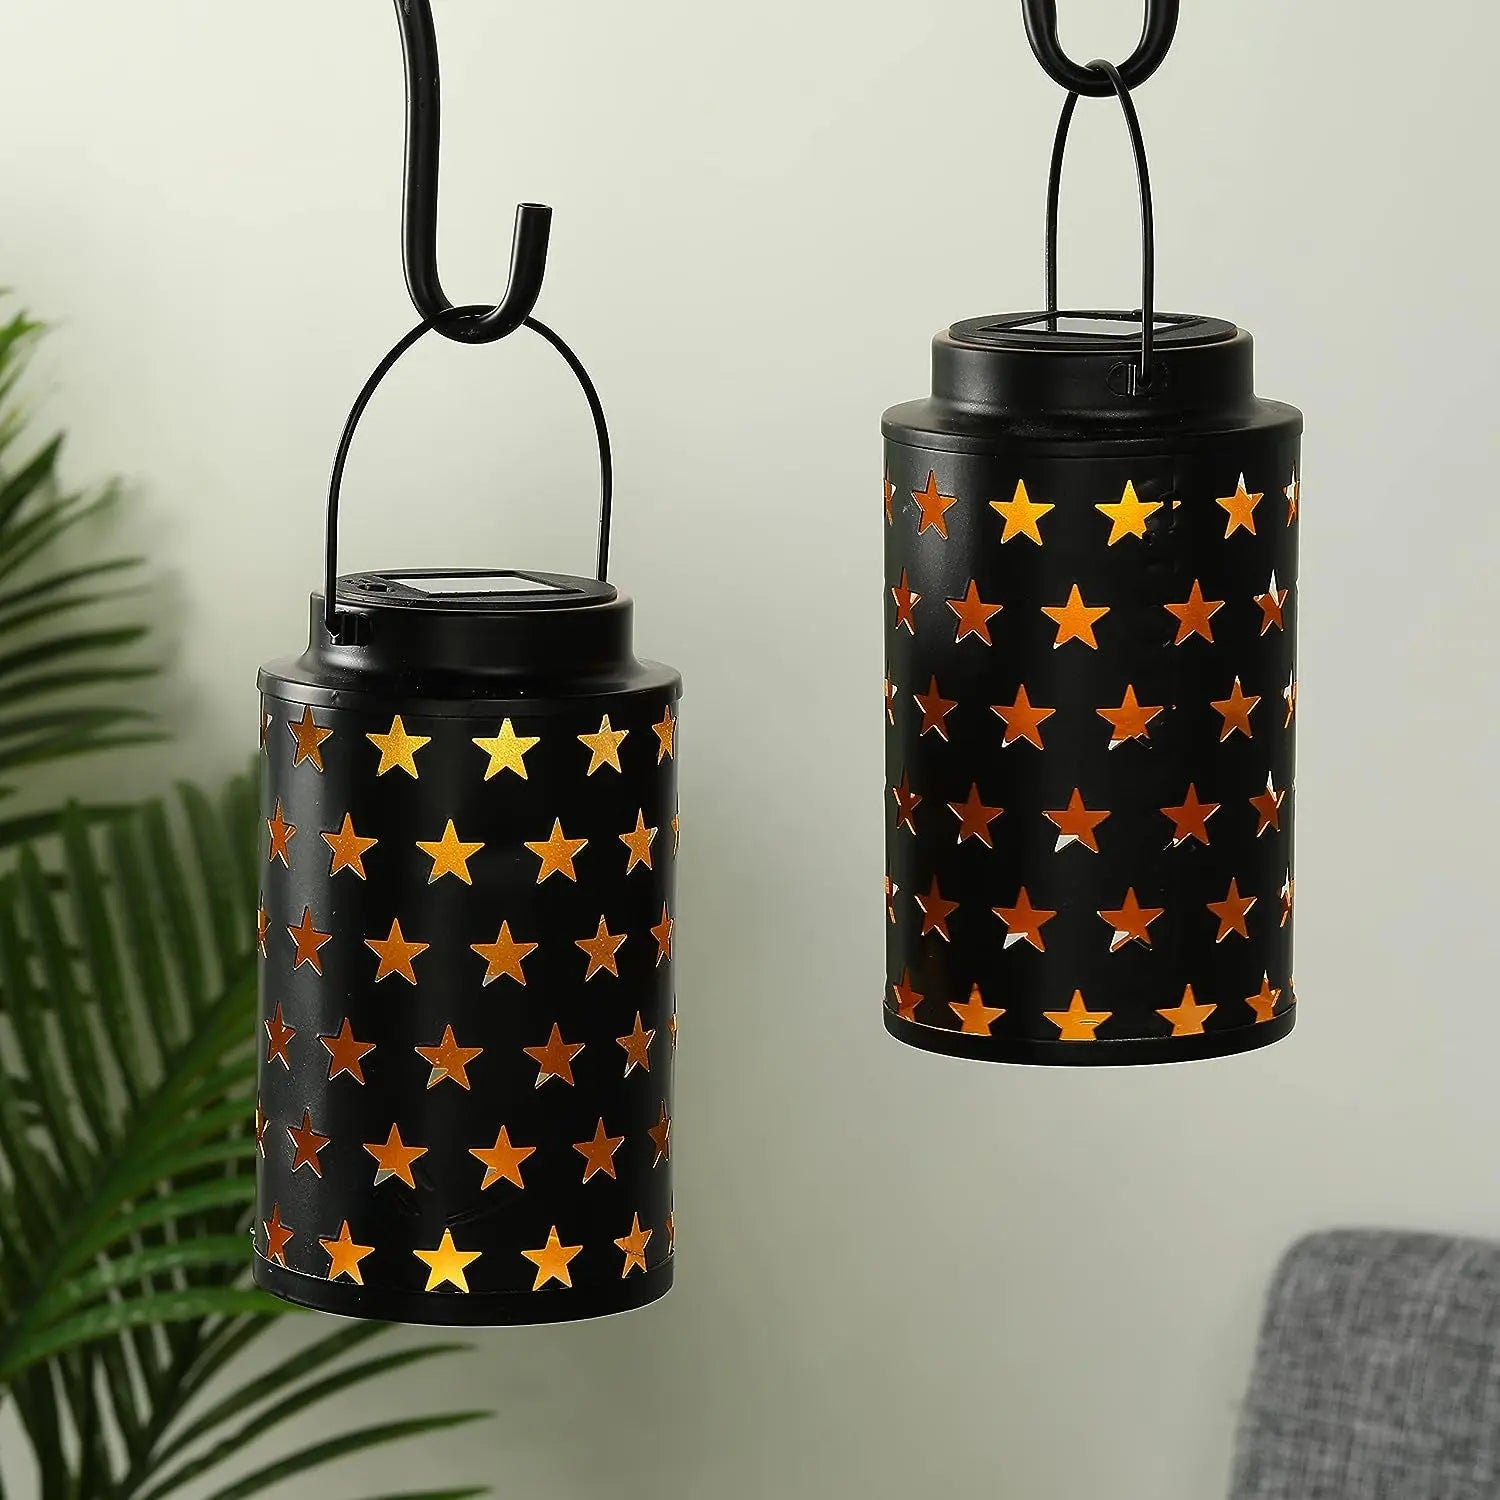 2 Pack Solar Lantern Lights Outdoor Solar Powered Table Lamp Lights Hanging Garden Lamp Metal Lantern with Handle for Patio Garden Outdoor Walkway Yard Landscape Park Lawn(Hollow Stars)